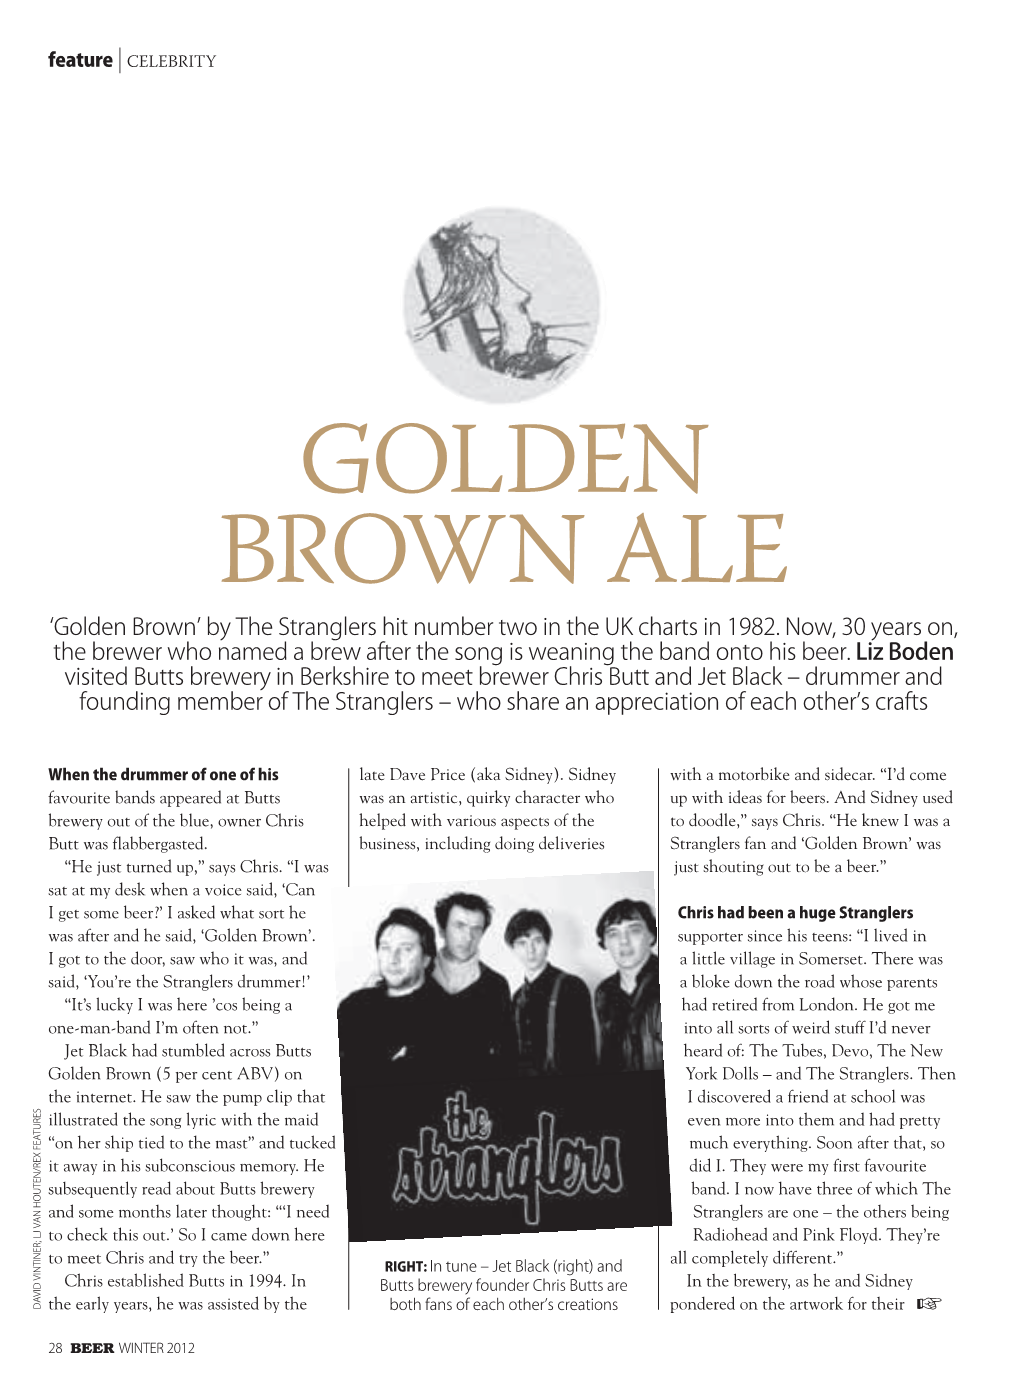 Golden Brown Ale ‘Golden Brown’ by the Stranglers Hit Number Two in the UK Charts in 1982